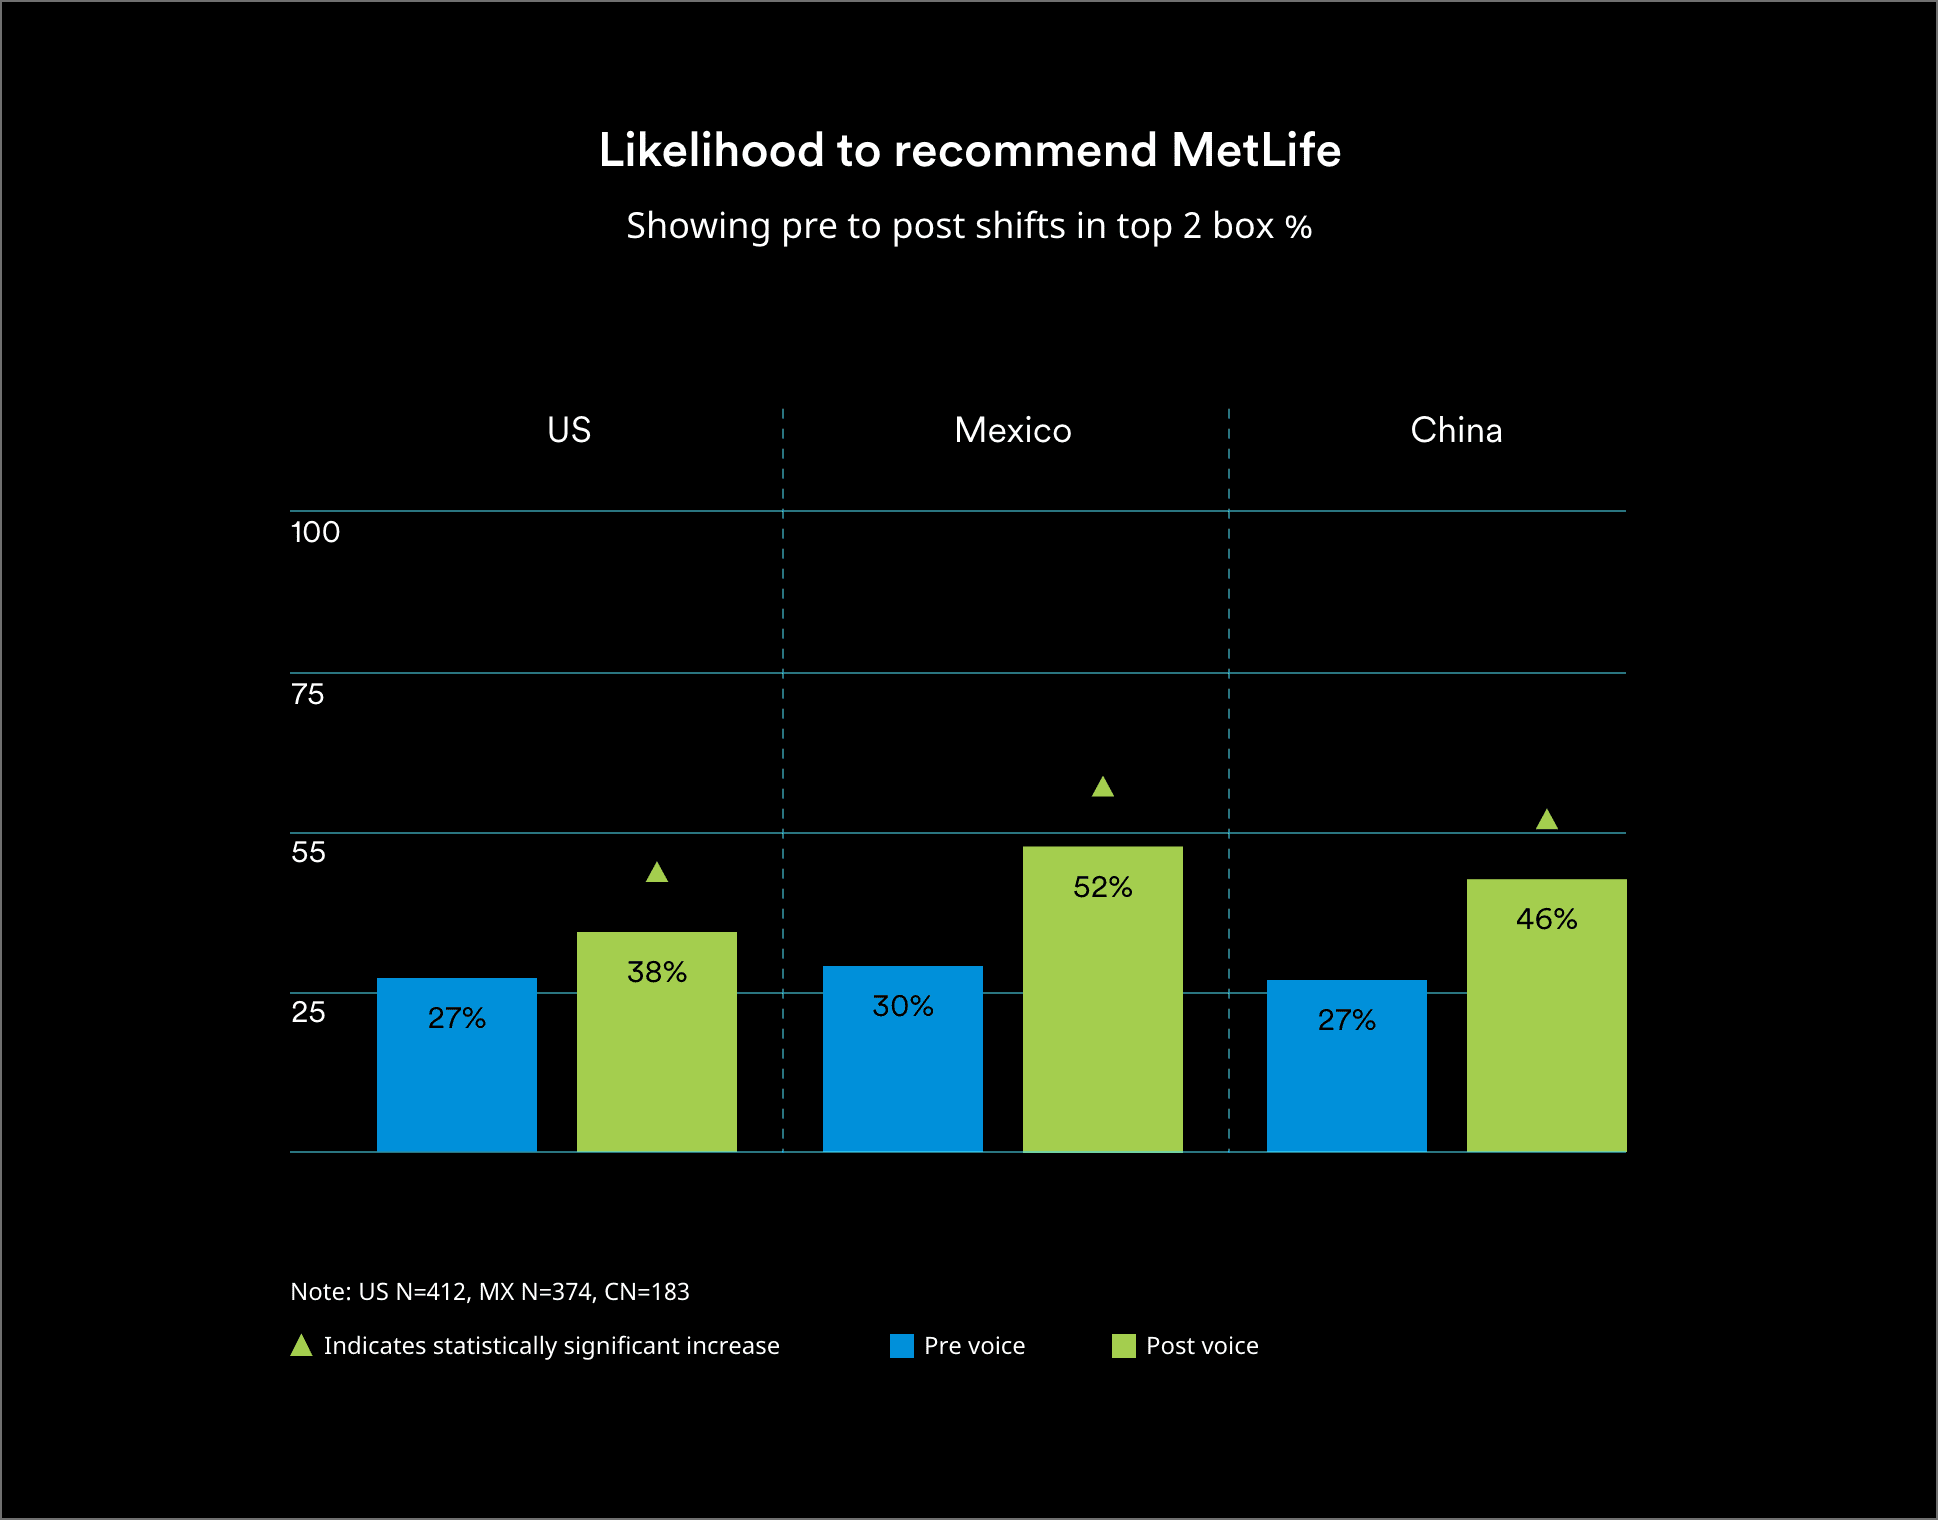 Bar chart titled “Likelihood to recommend MetLife.”